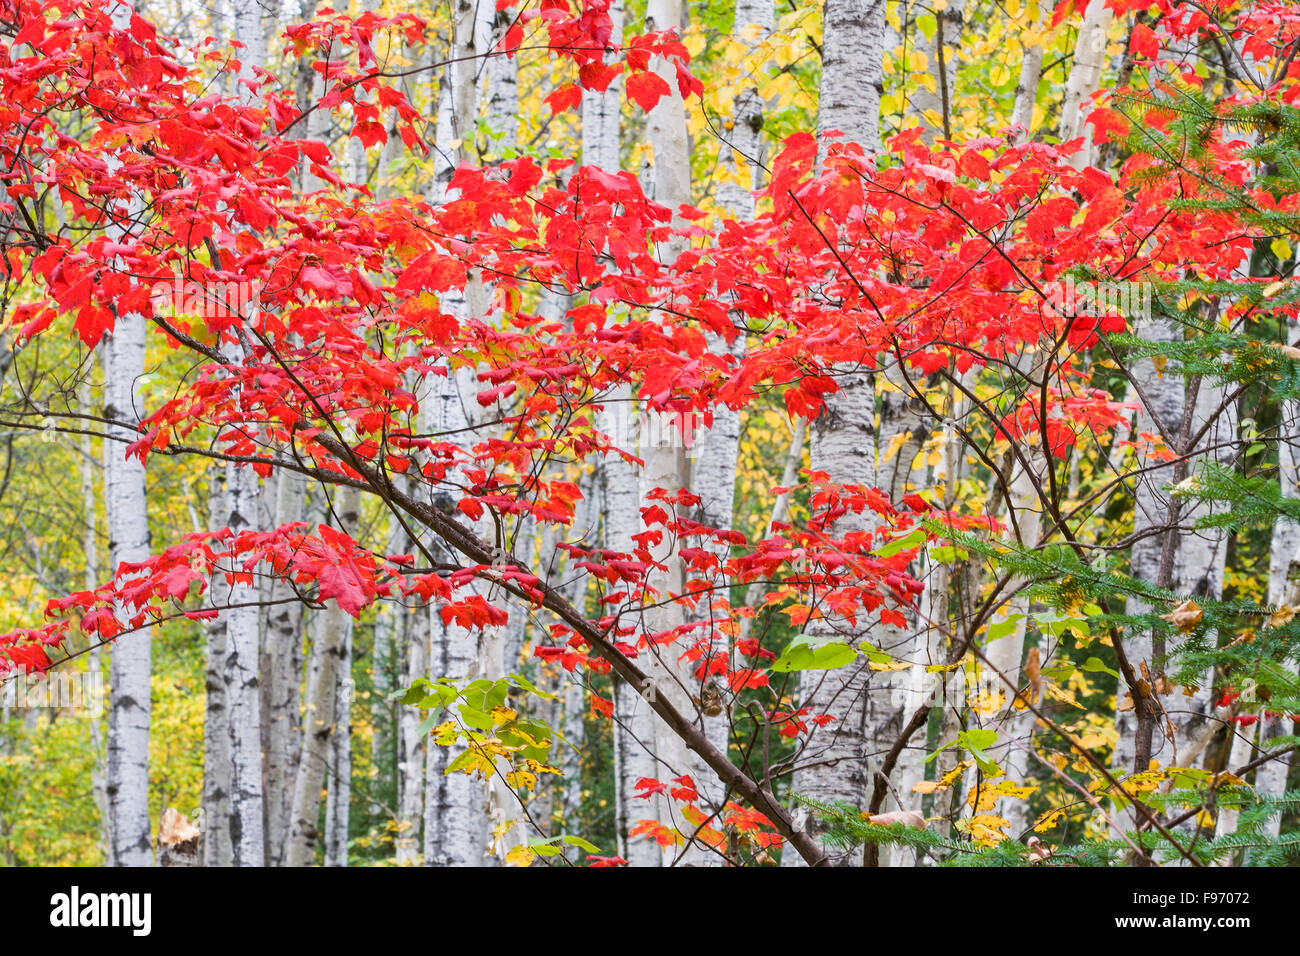 Red maples and birches, Aubrey Falls Provincial Park, Ontario, Canada Stock Photo